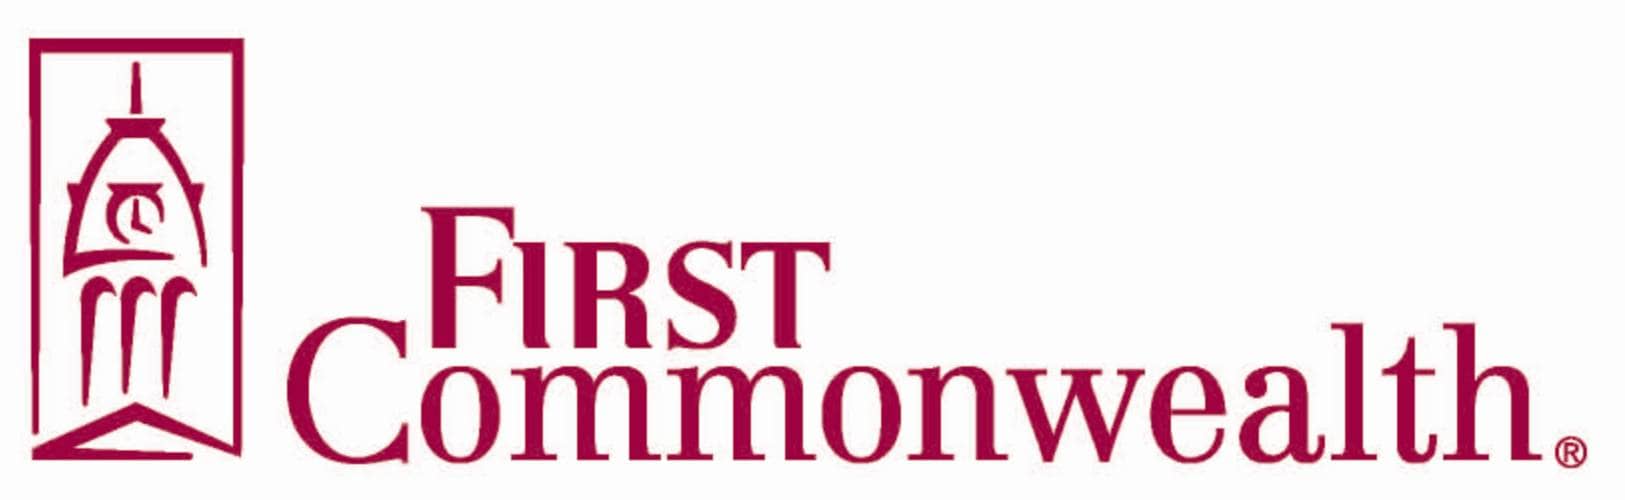 First Commonwealth